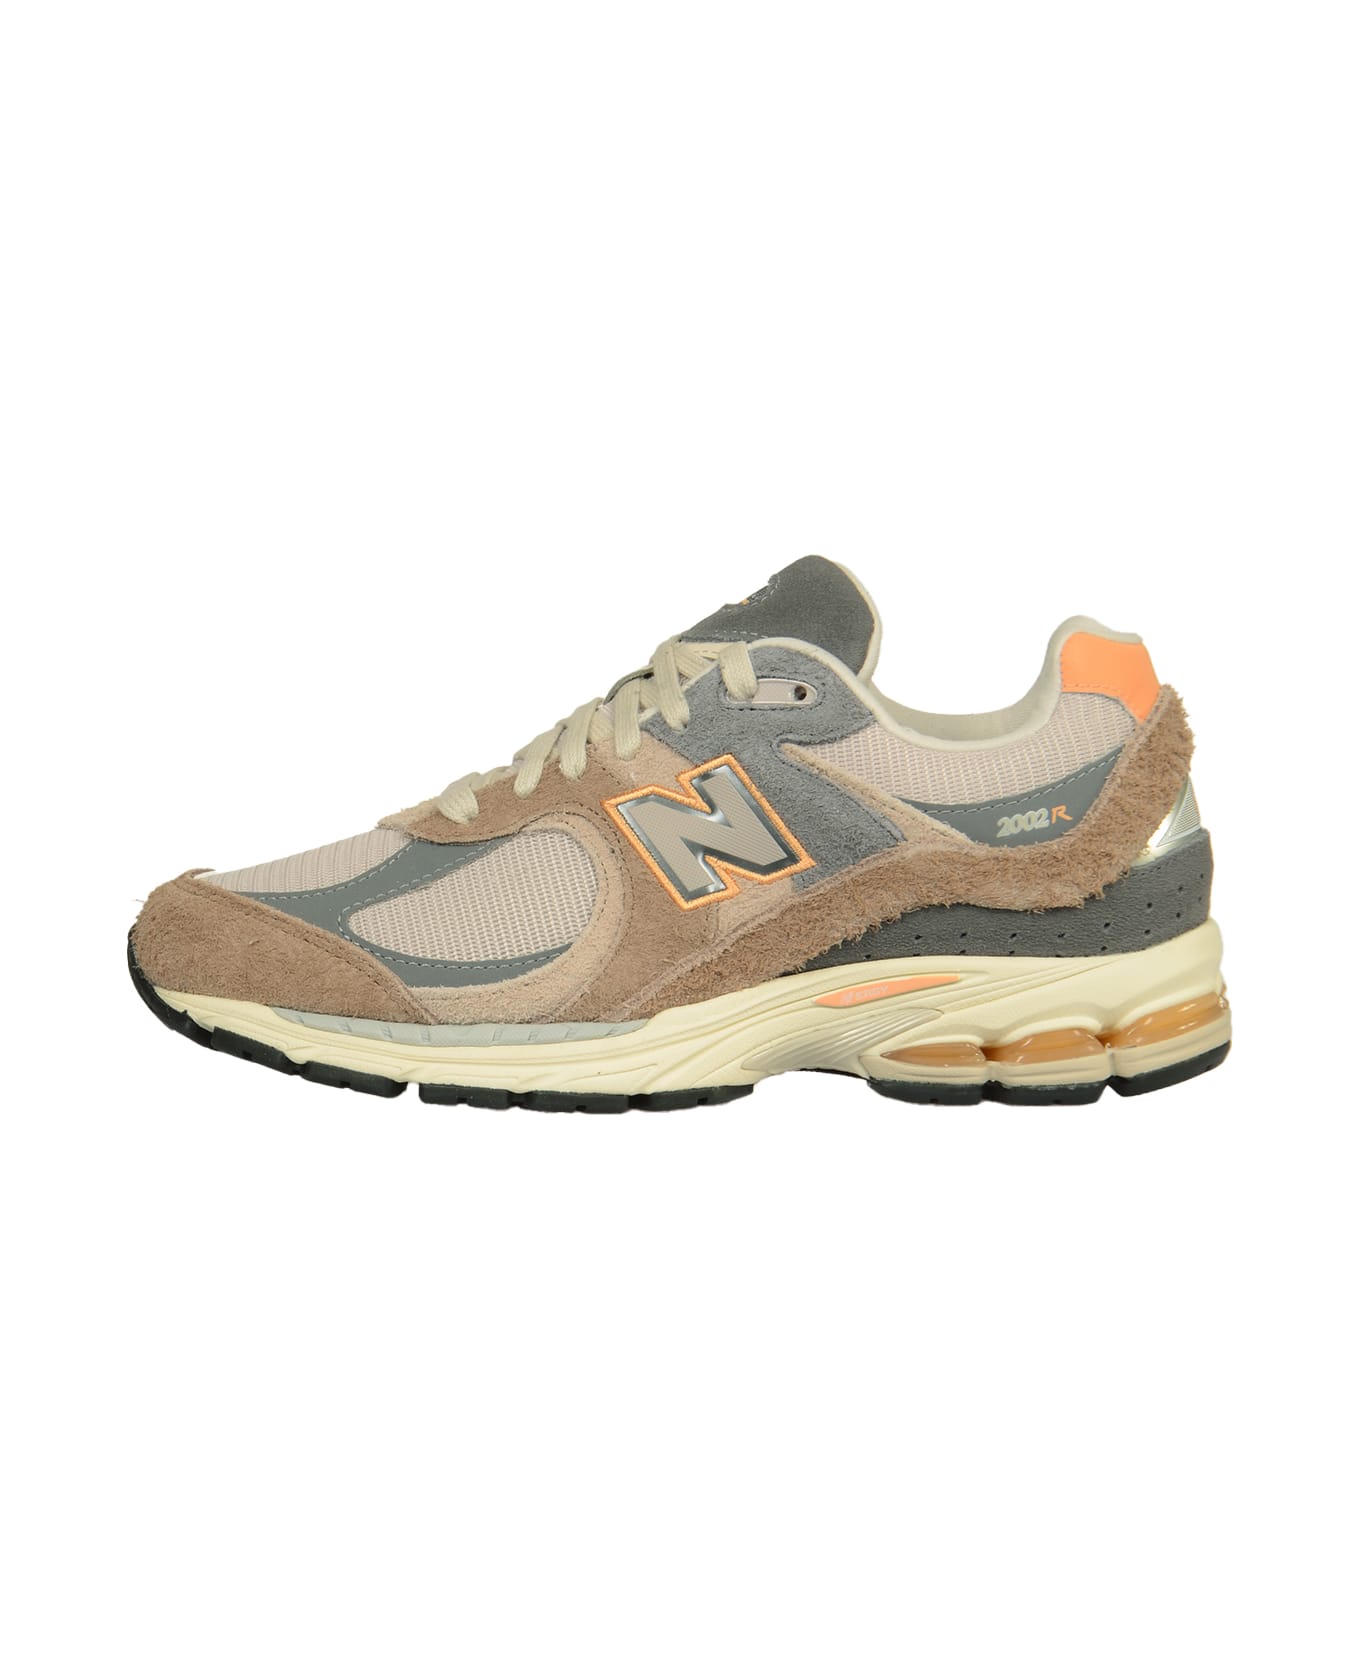 New Balance Logo Patched Sneakers - MULTICOLOR スニーカー